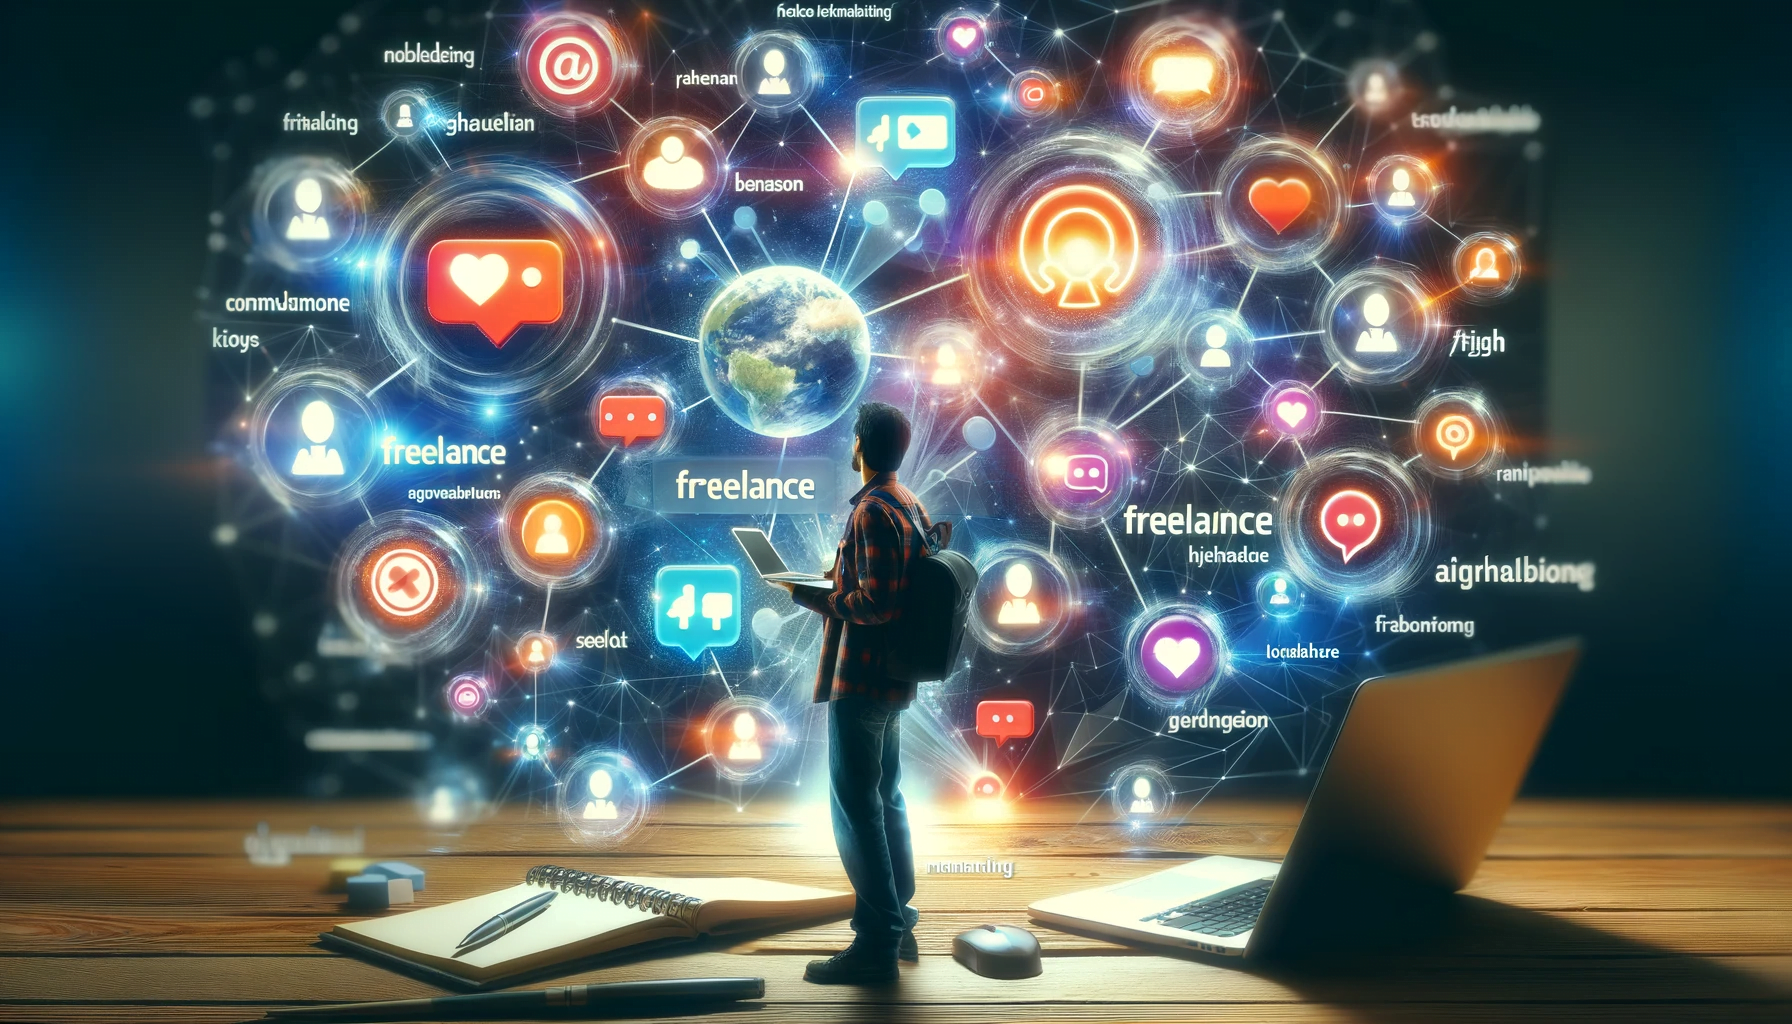 Image showing a freelance social media manager interacting with an online community through likes, comments, and conversation bubbles.